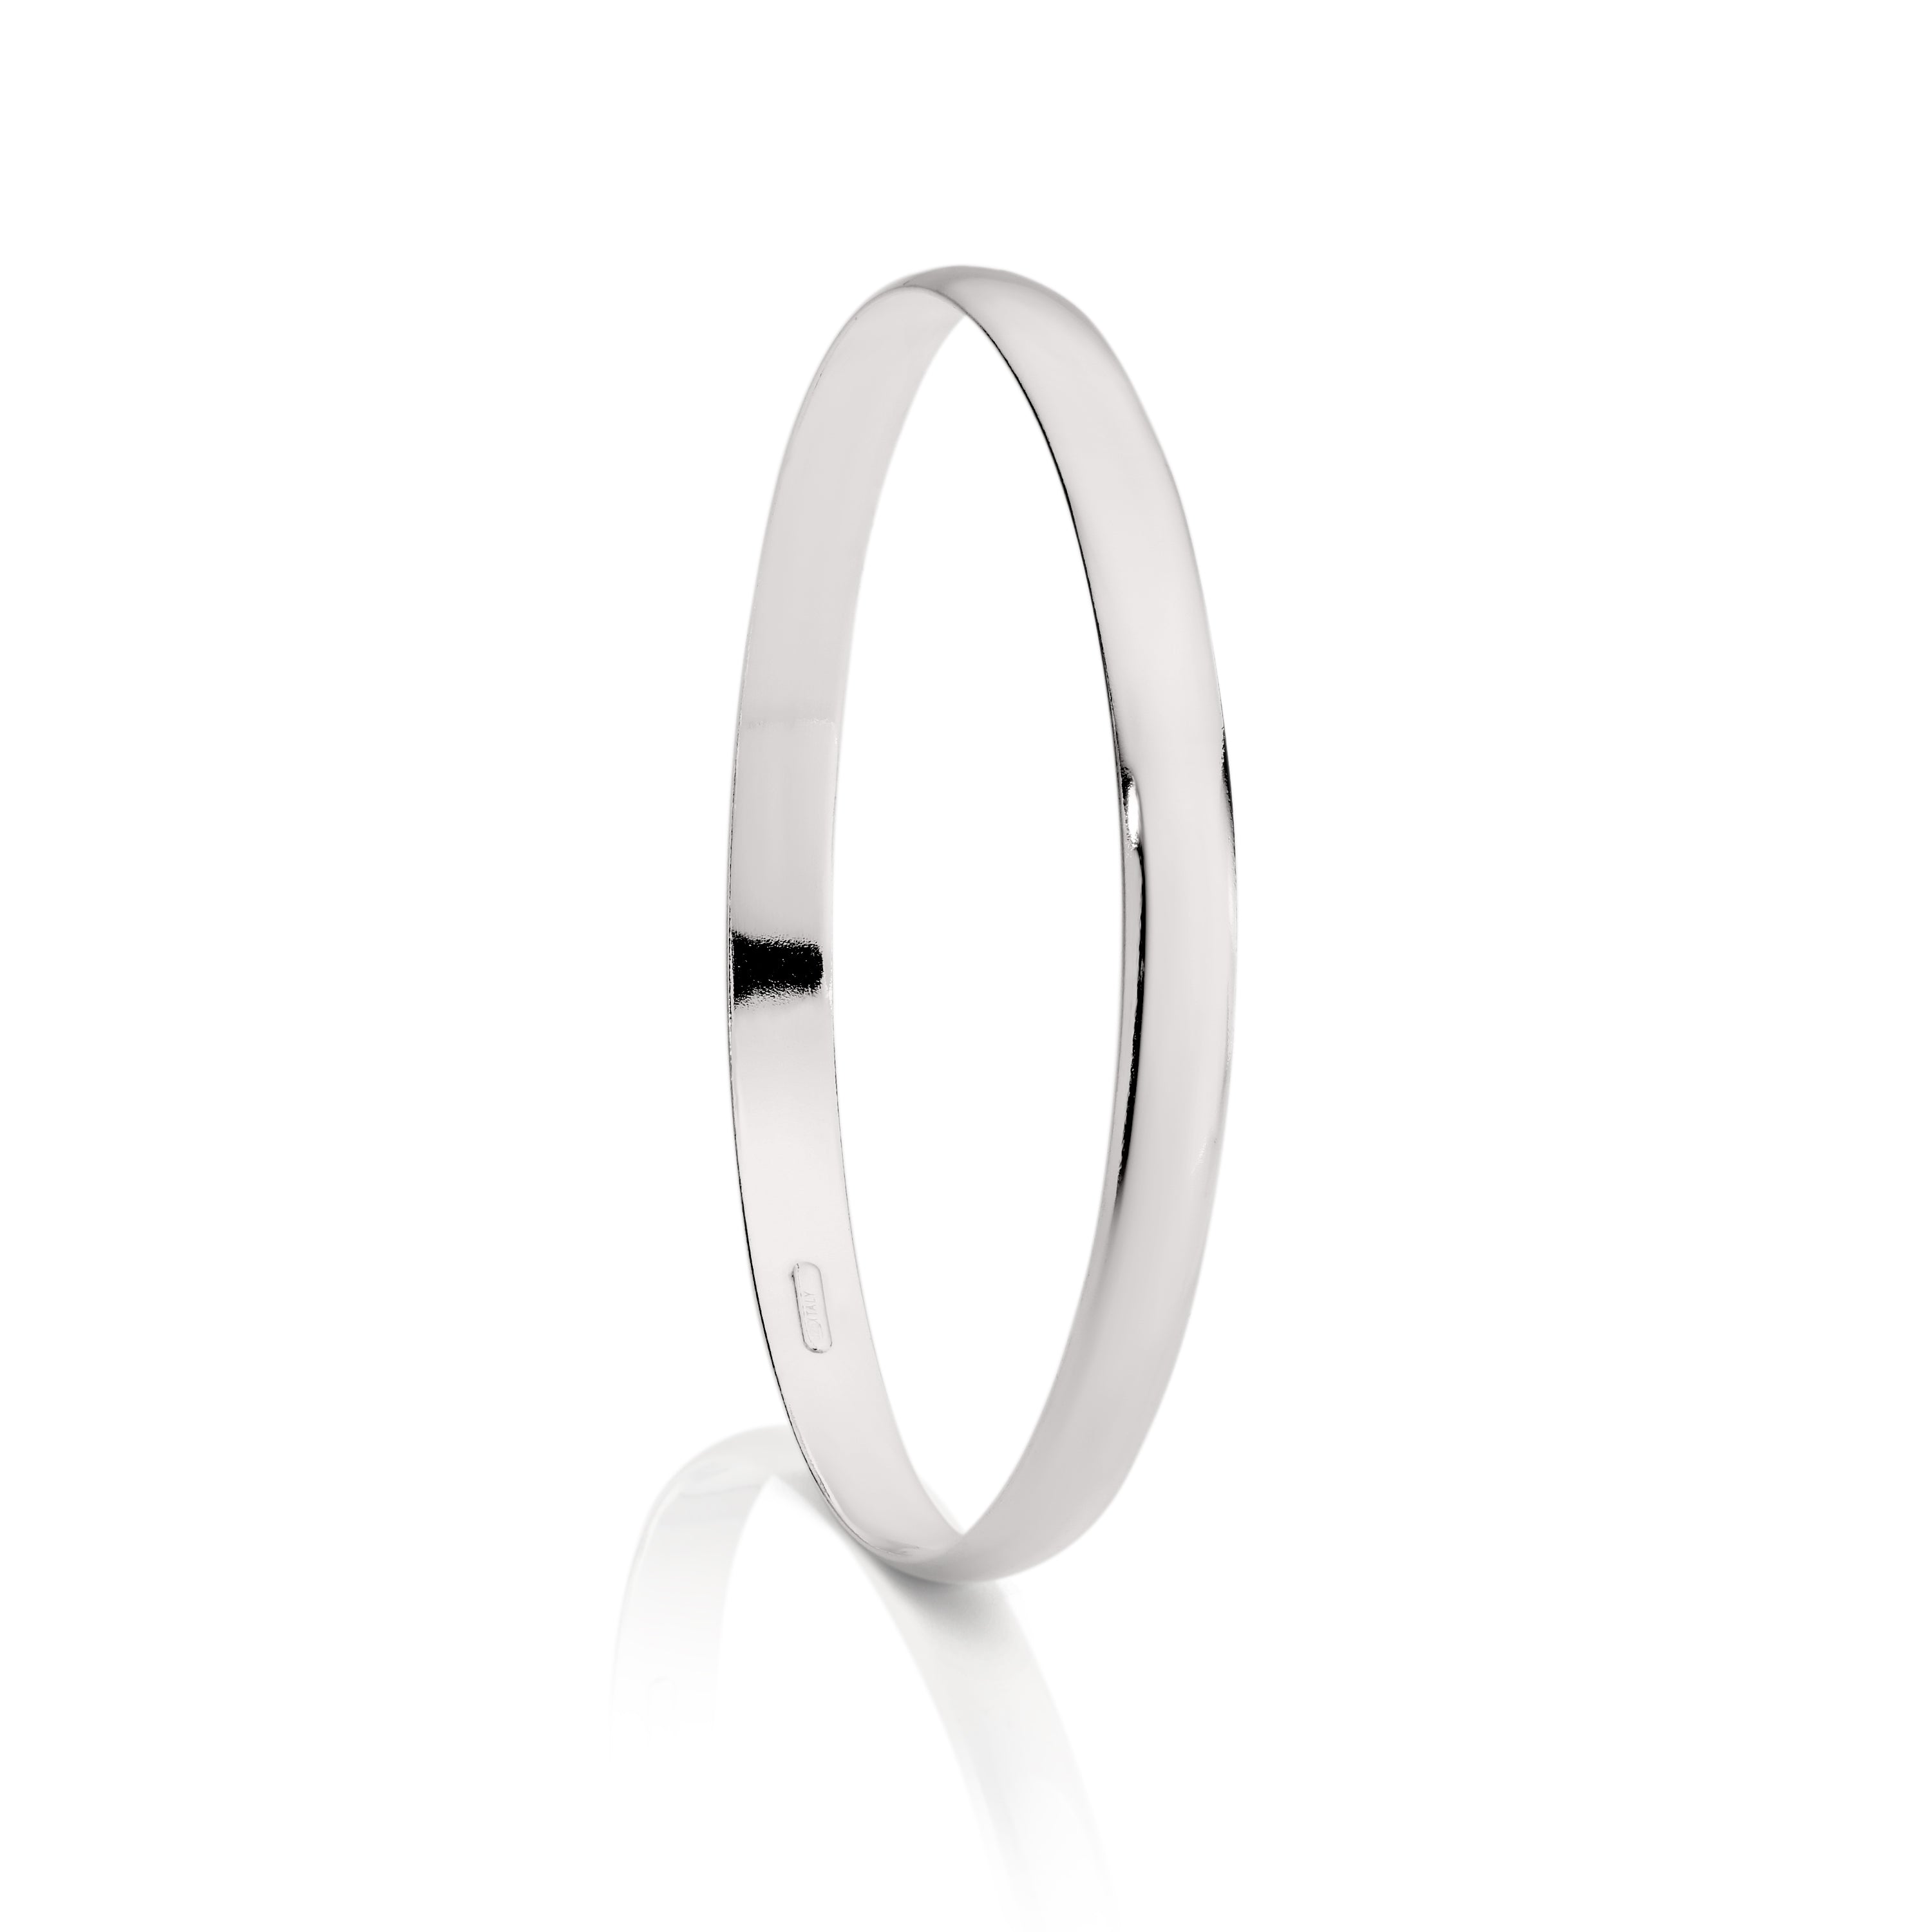 Silver 6mm solid bangle 65mm